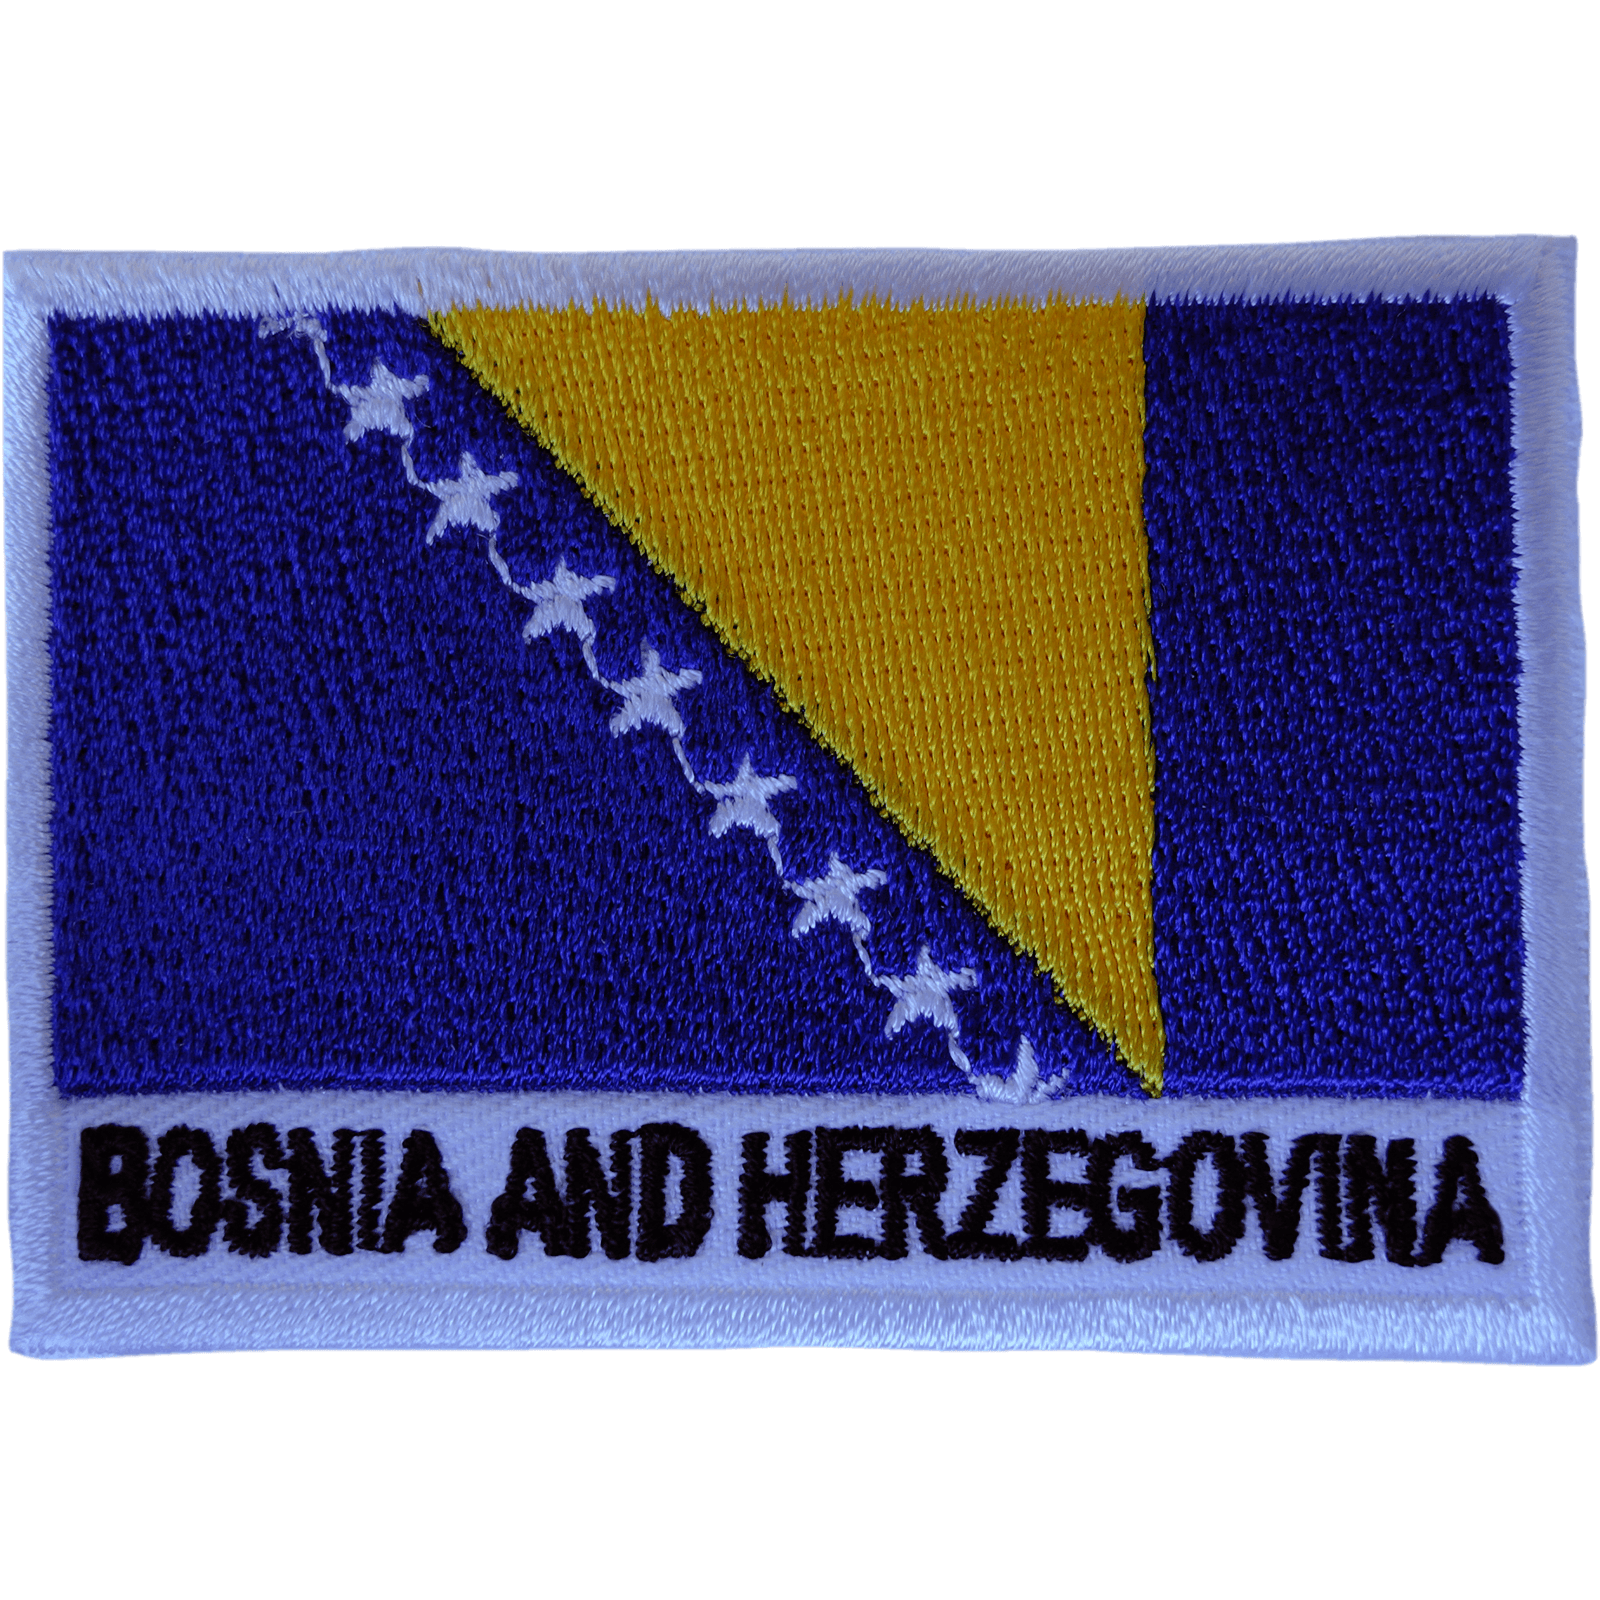 Bosnia and Herzegovina Flag Patch Iron Sew On Clothes Bosnian Embroidered Badge